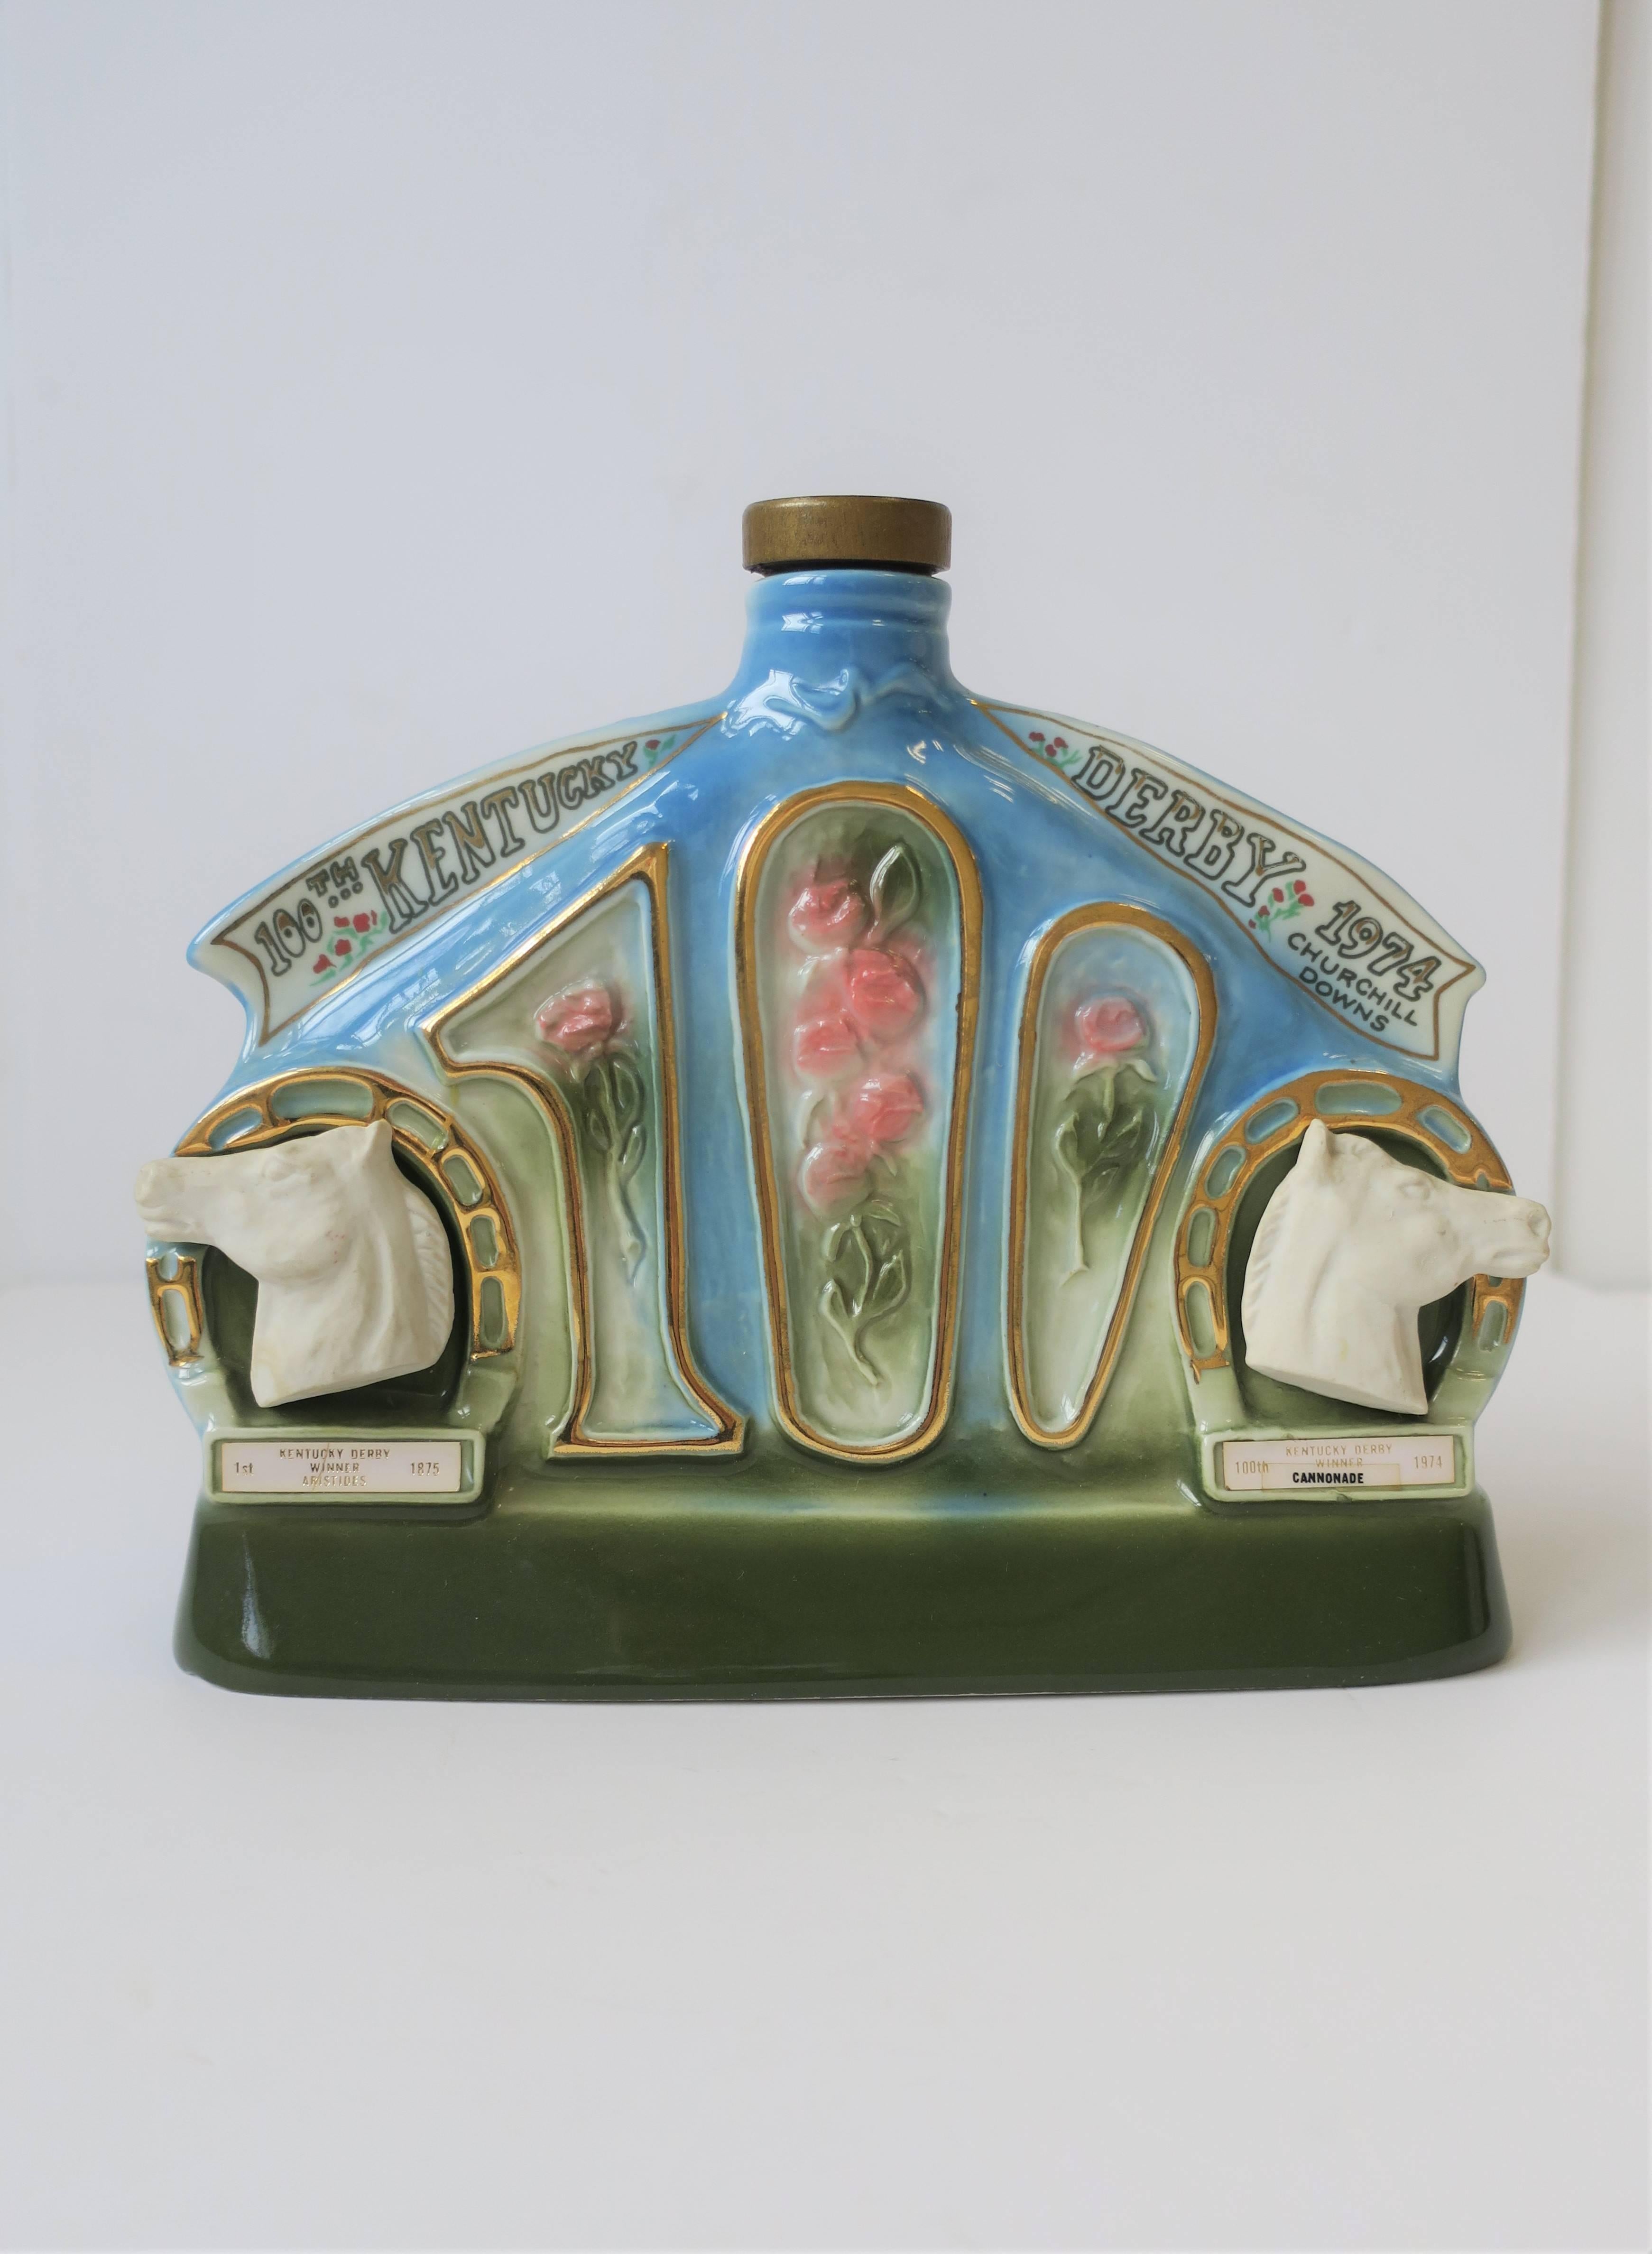 A vintage 100th Anniversary Kentucky Derby 'Run for the Roses' decanter liquor or spirits bottle by James B. Beam Distilling Co., circa 1974. Bottle commemorates the 100th Anniversary of the Kentucky Derby 'Run for the Roses' horse race with all